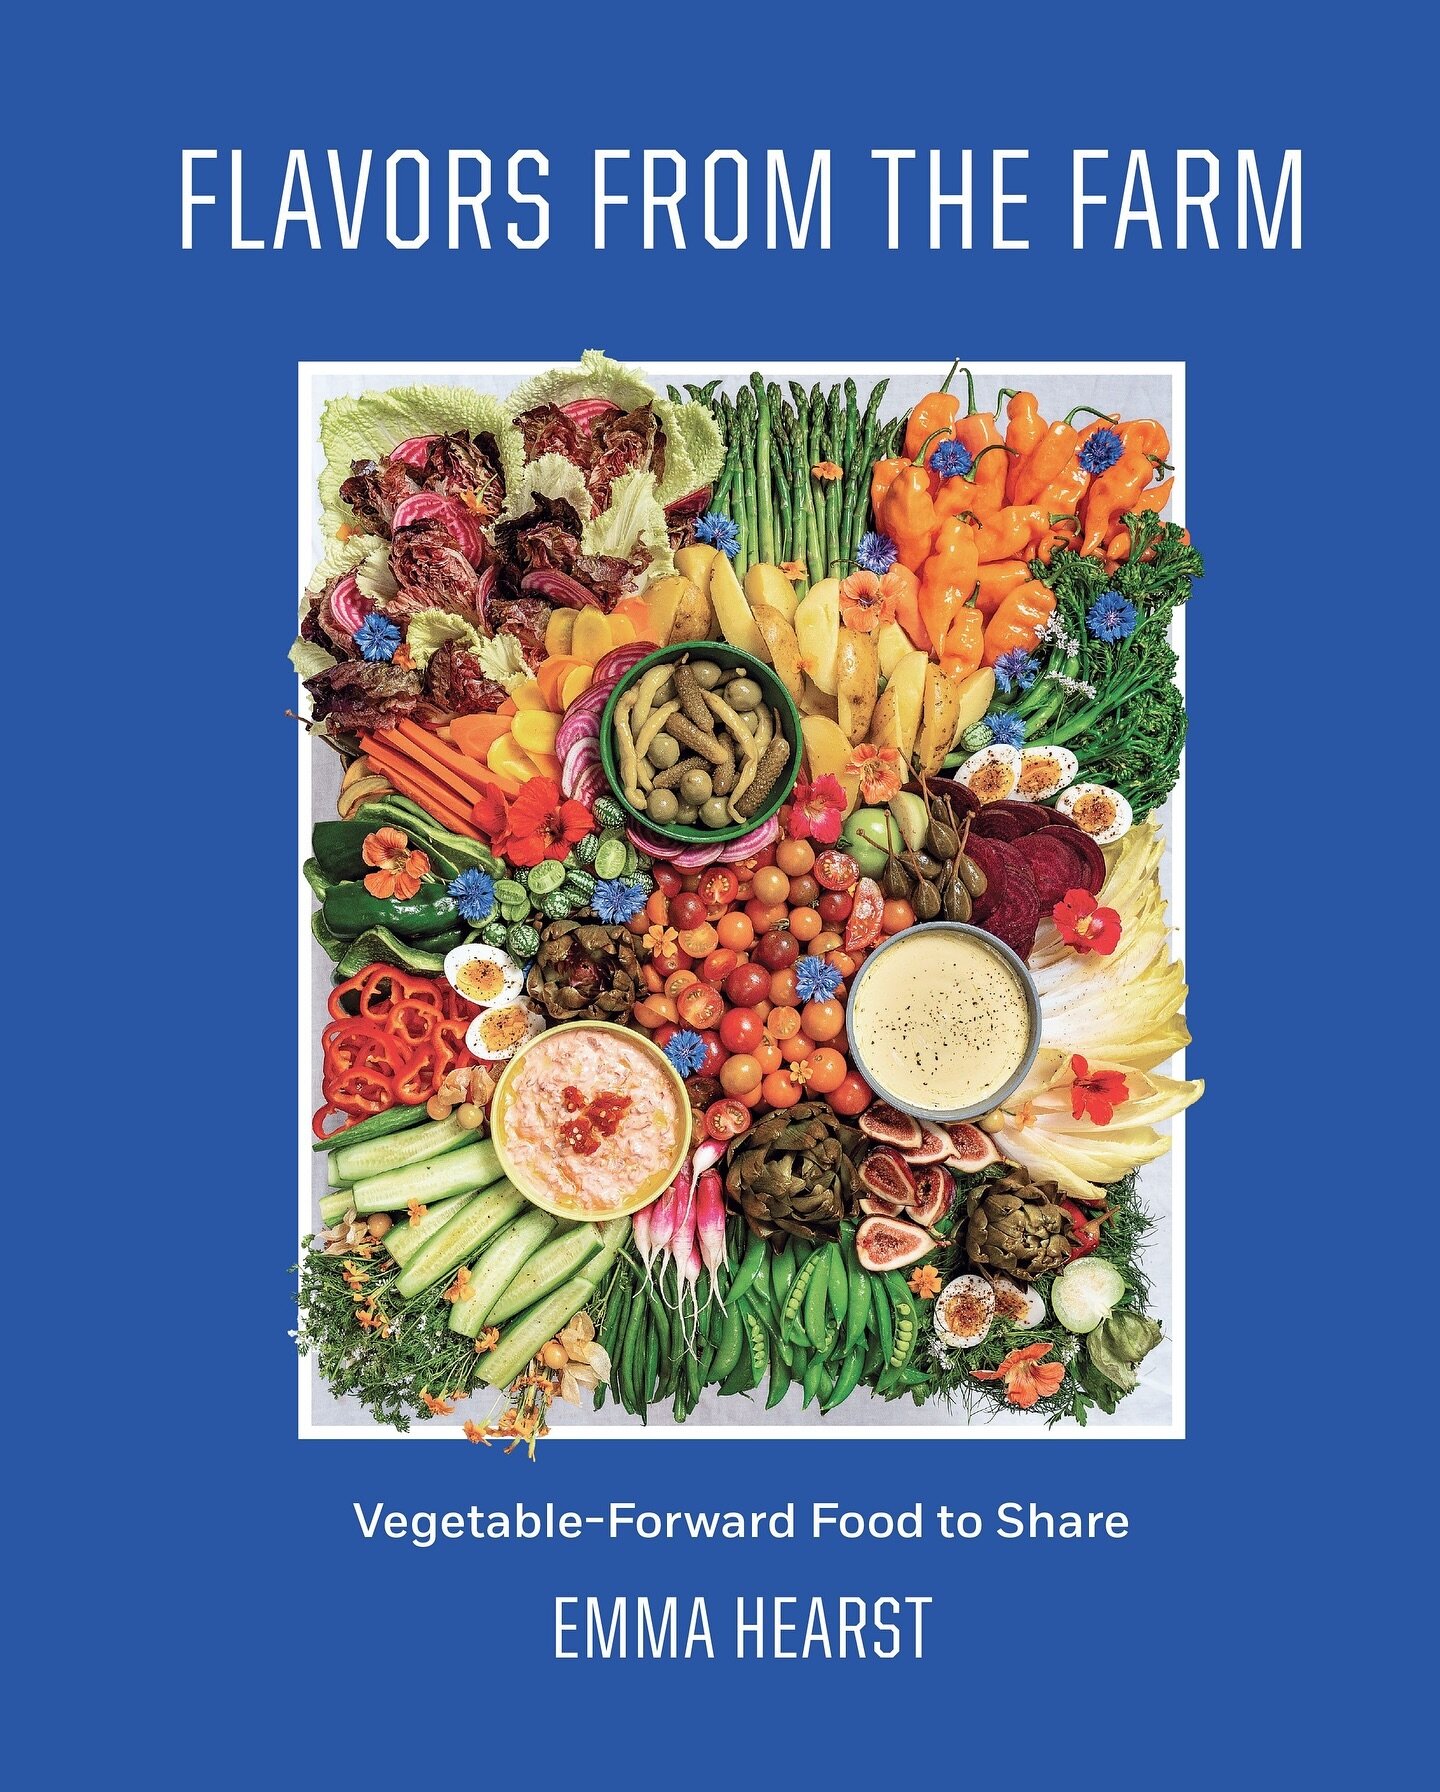 ✍️ Special Announcement!!! 📖 We&rsquo;re excited to announce the launch of our new book &ldquo;Flavors From The Farm&rdquo;. This has been an absolute labor of love, with every person from the FFF team leaving their mark.  This book contains 100+ fl